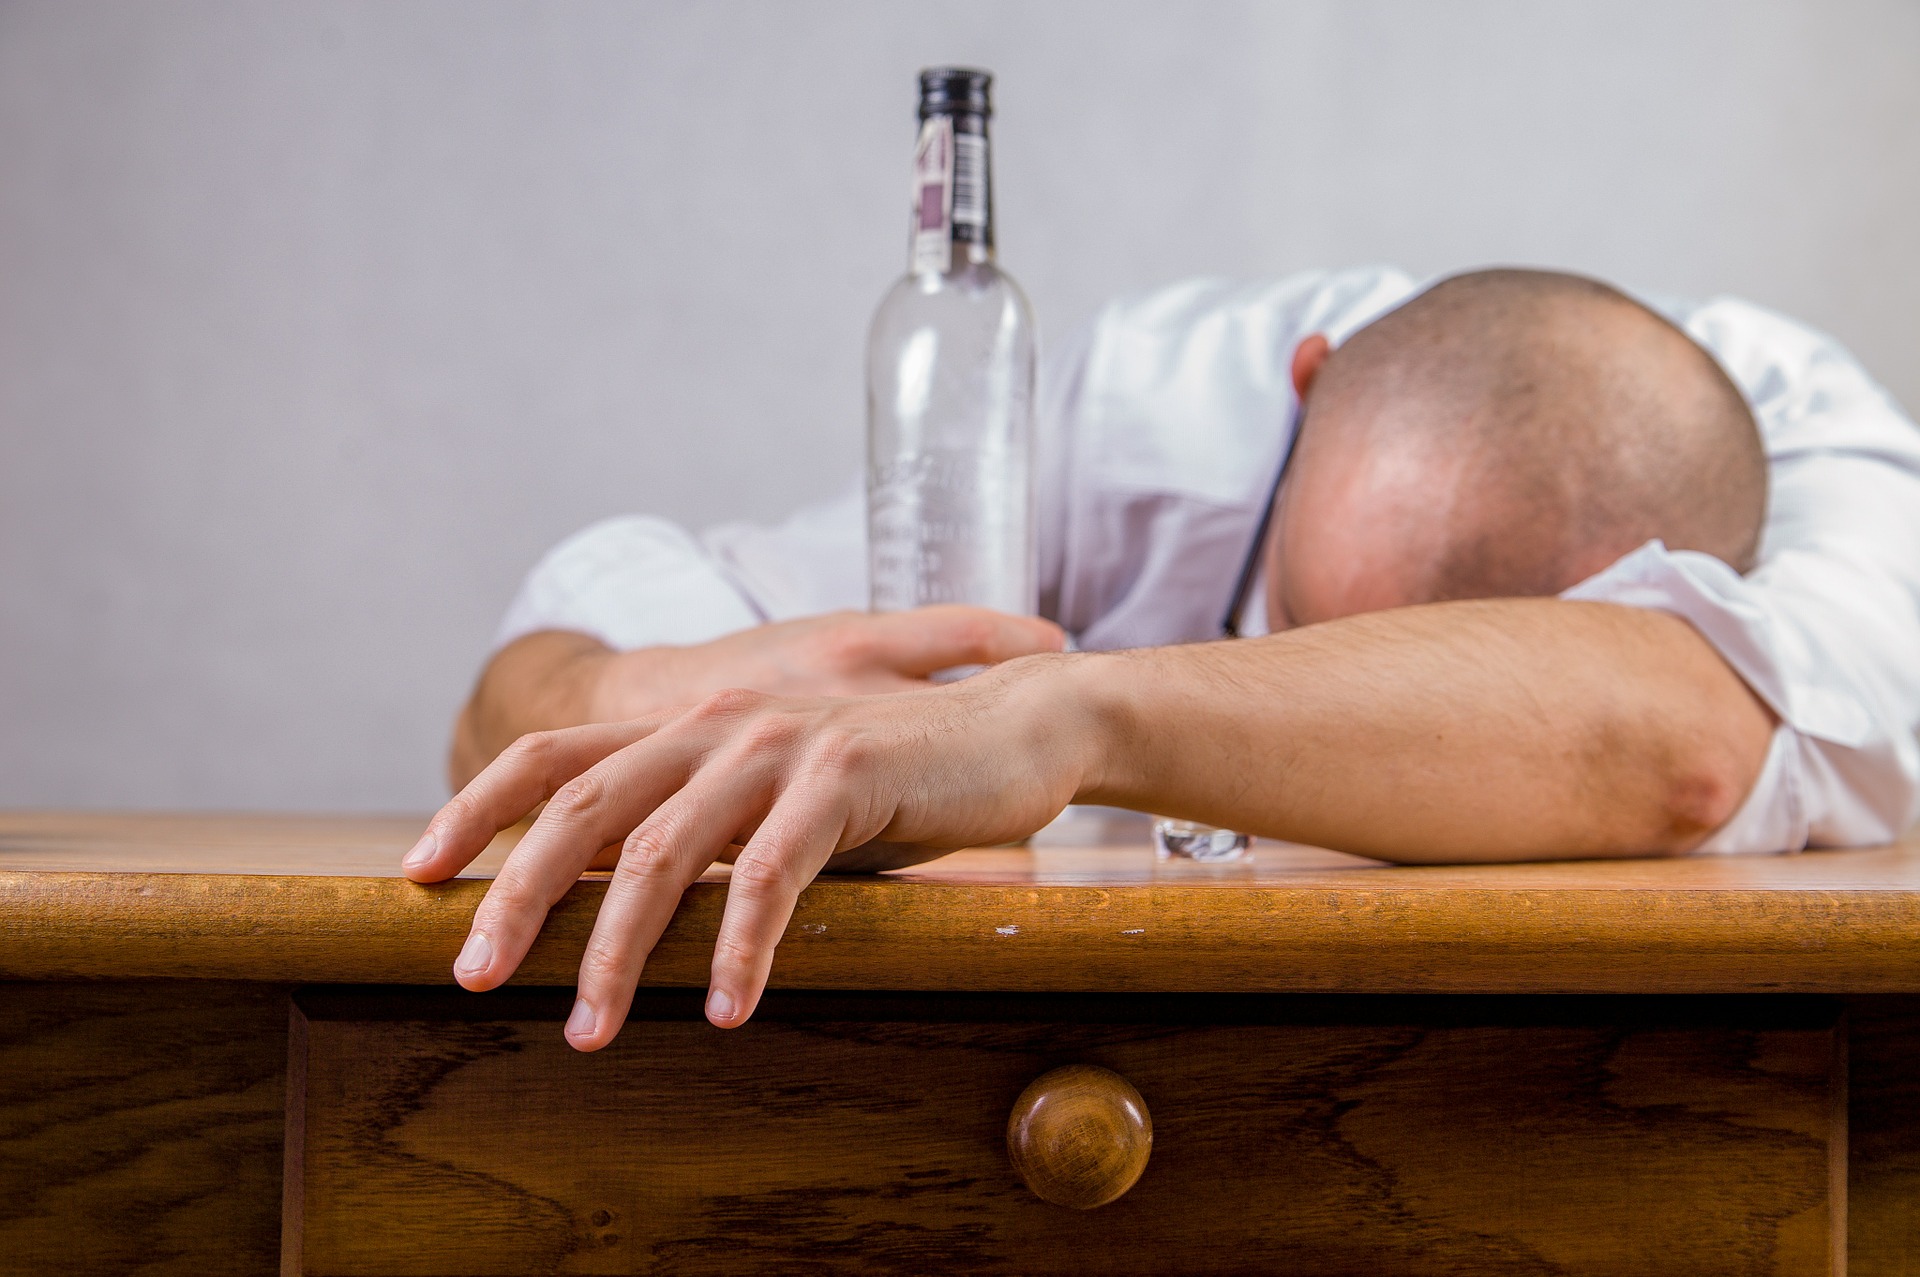 A man sitting slumped over a bar with an empty bottle in one hand.